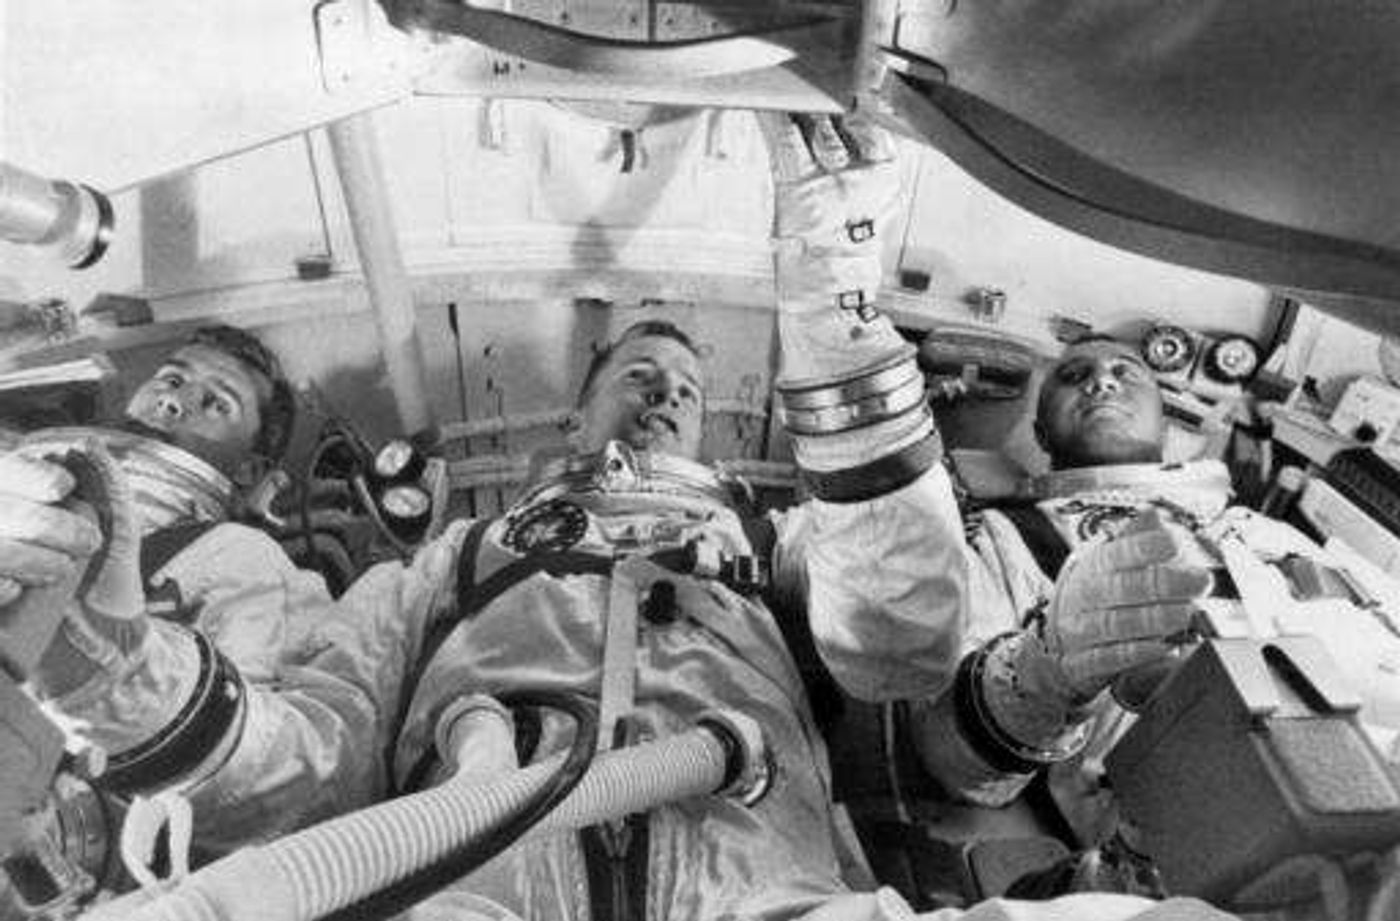 NASA astronauts from left, astronauts Roger Chaffee, Edward White II, and Virgil Grissom, practice for launch inside the Apollo 1 capsule.